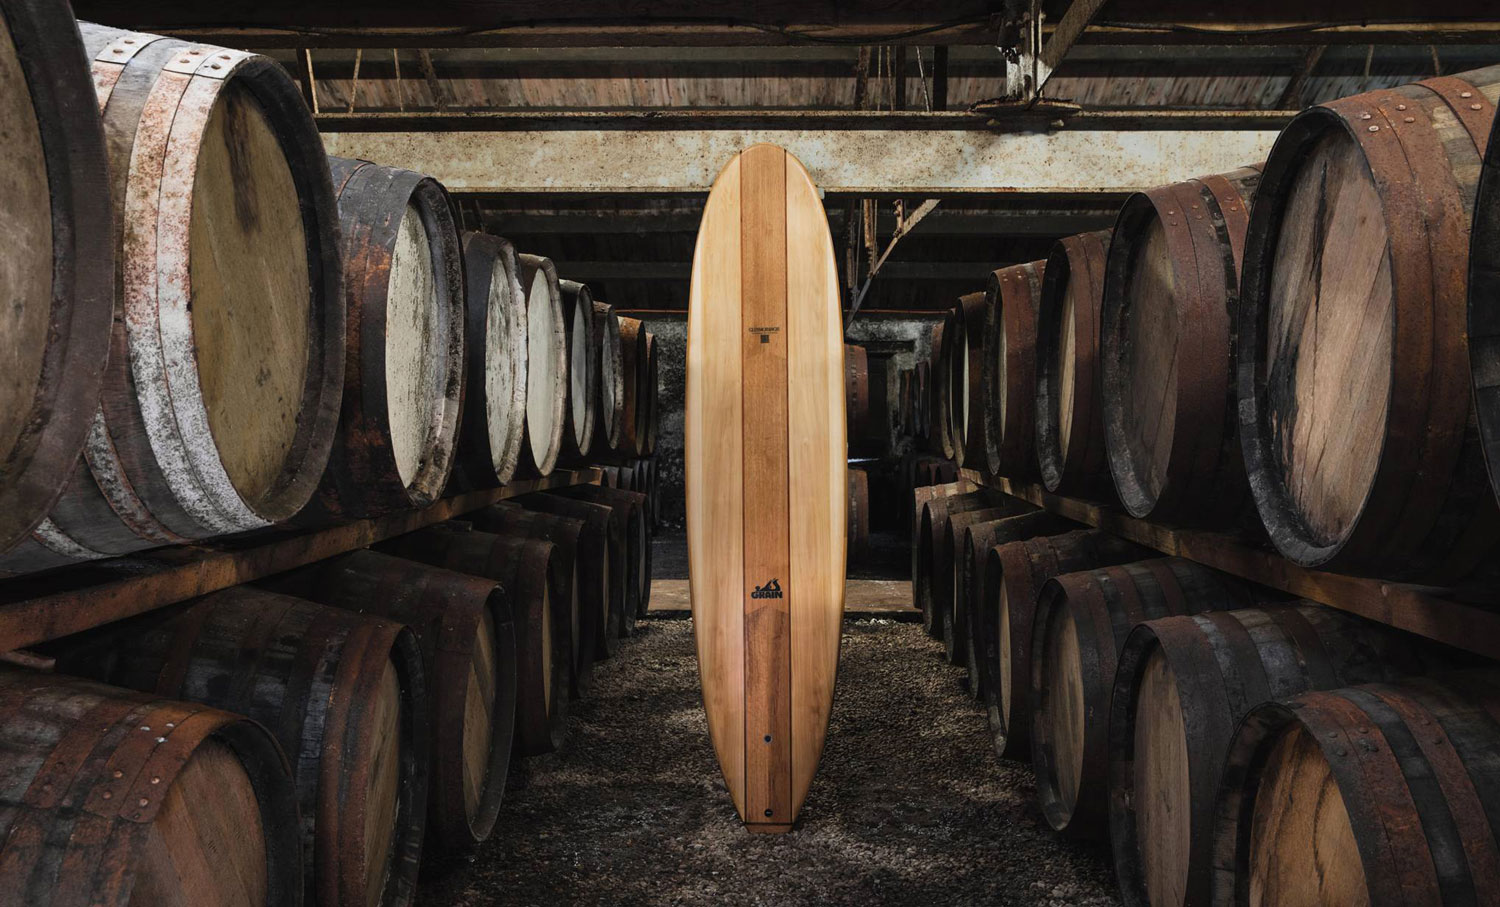 Glenmorangie Are Now Making $8,000 Surfboards From Old Whisky Casks photo